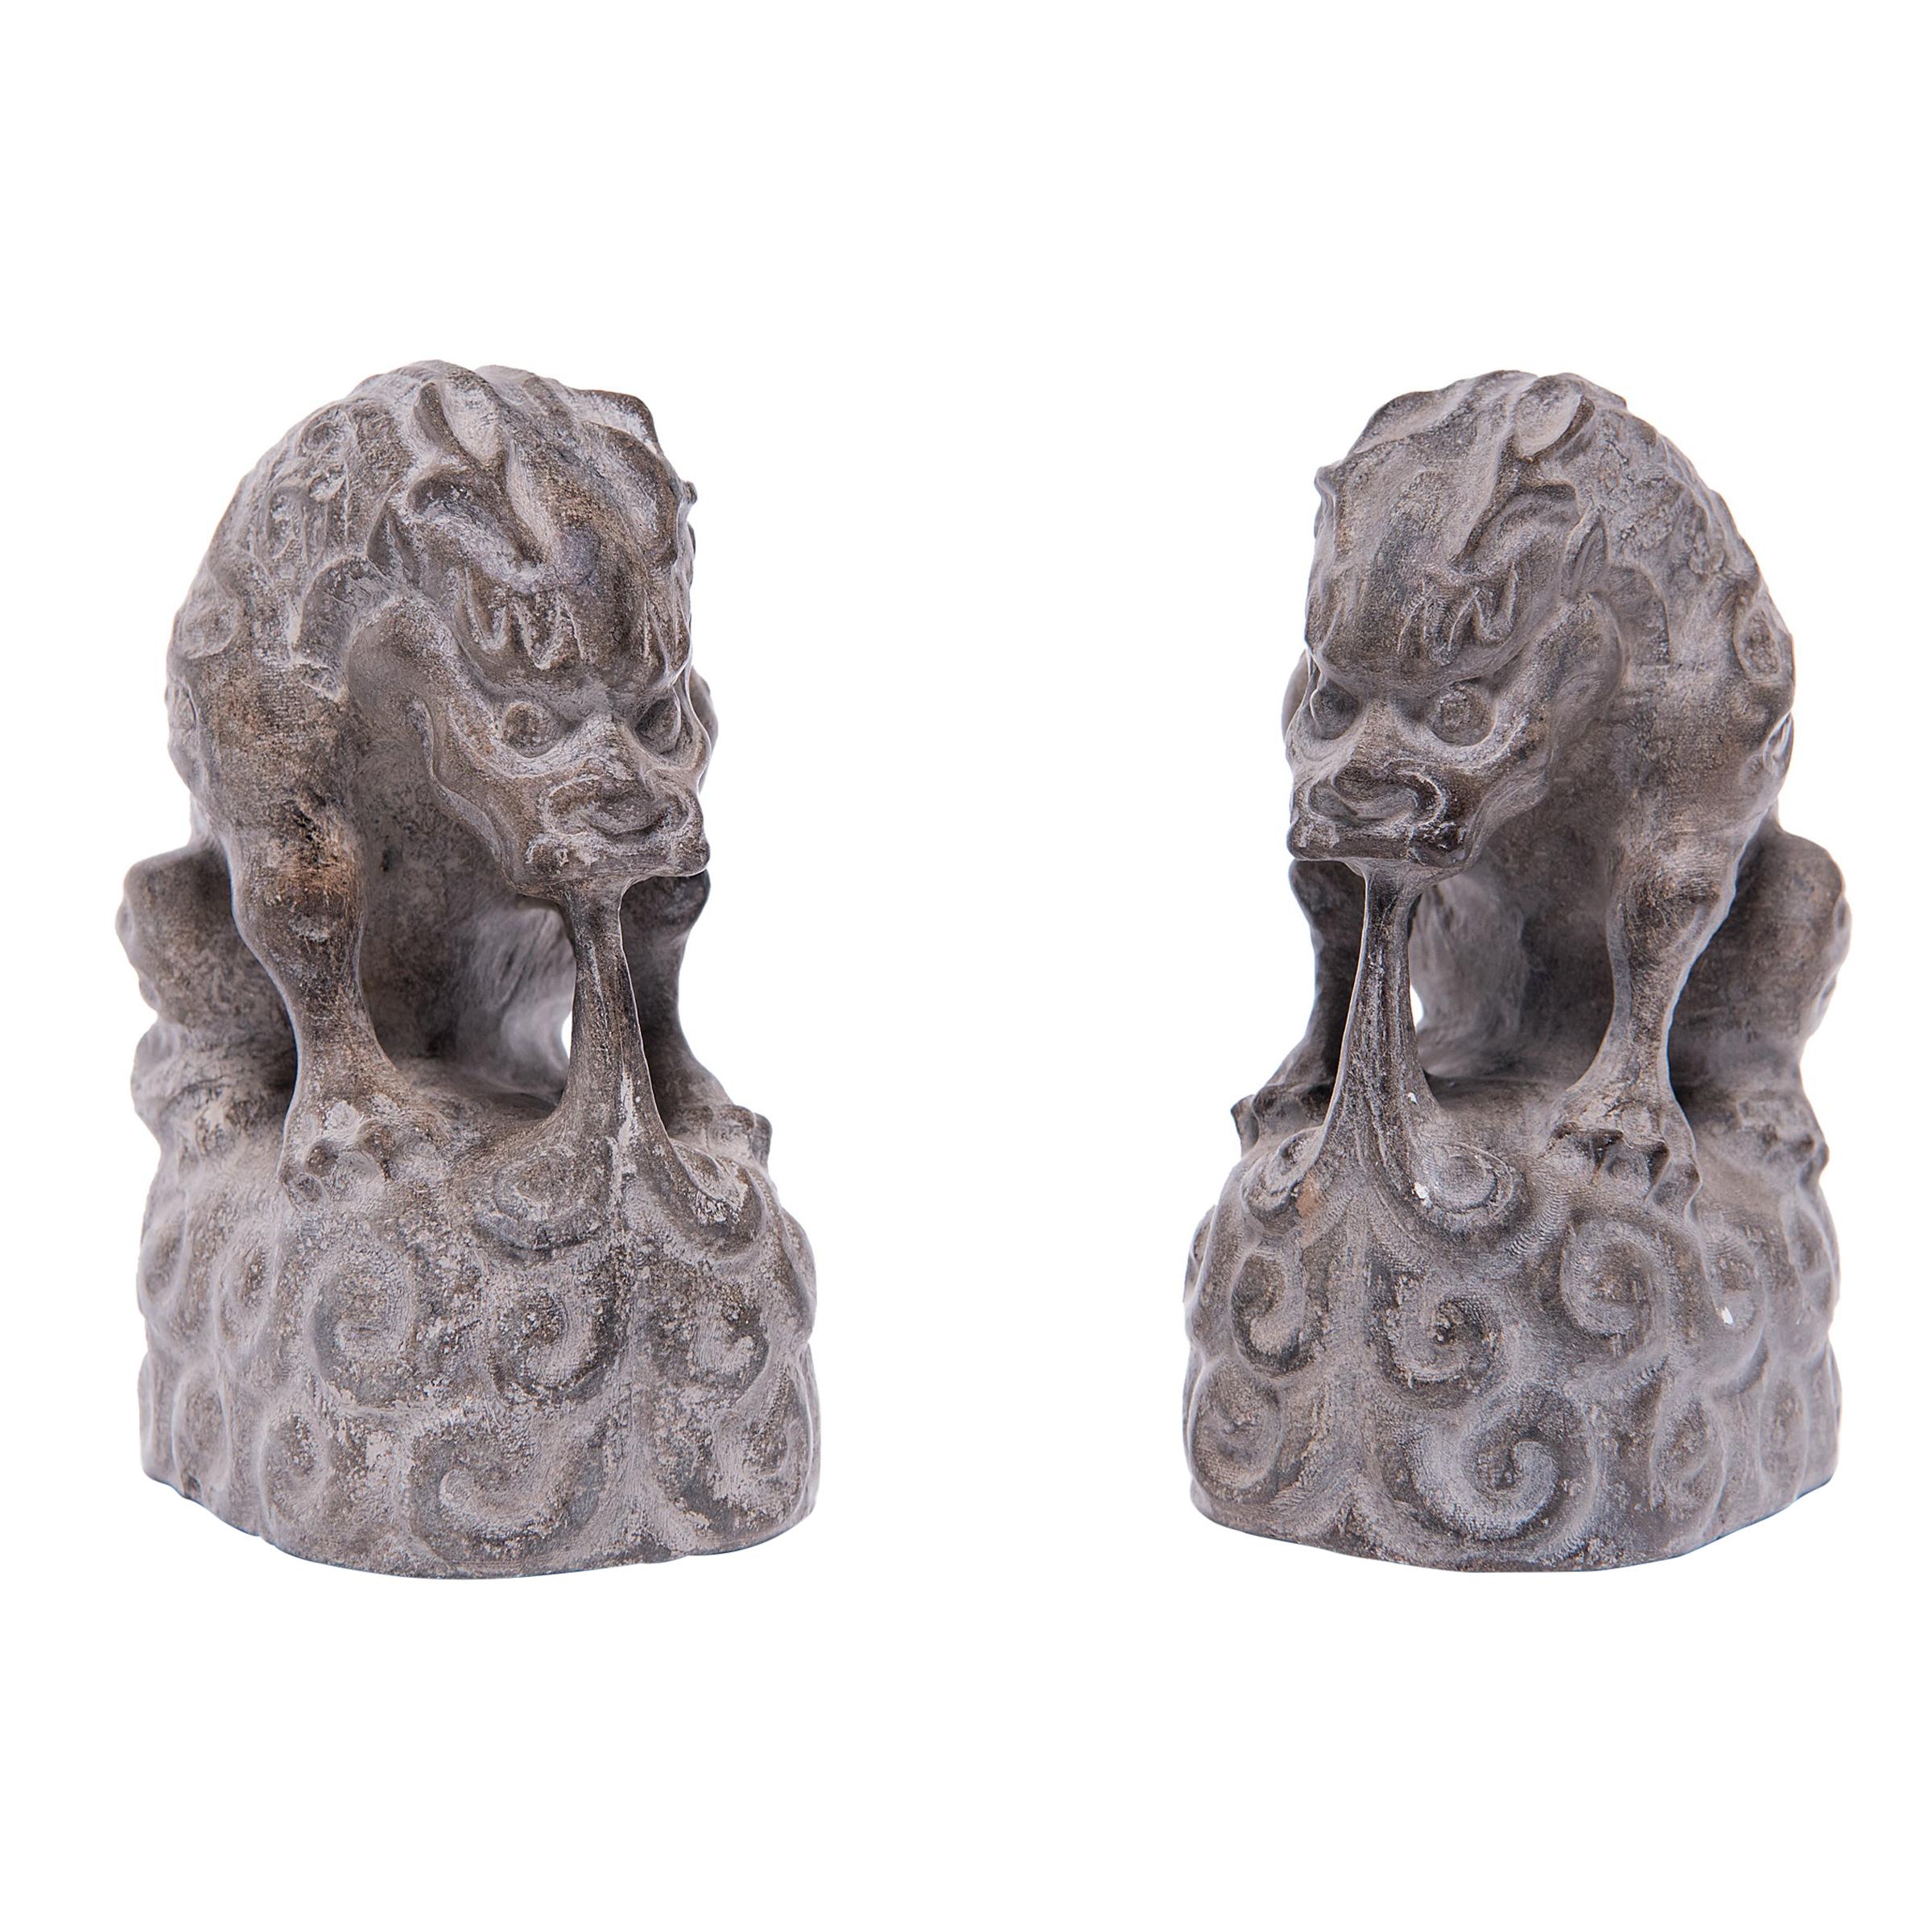 Pair of Petite Mythical Qilin Figures